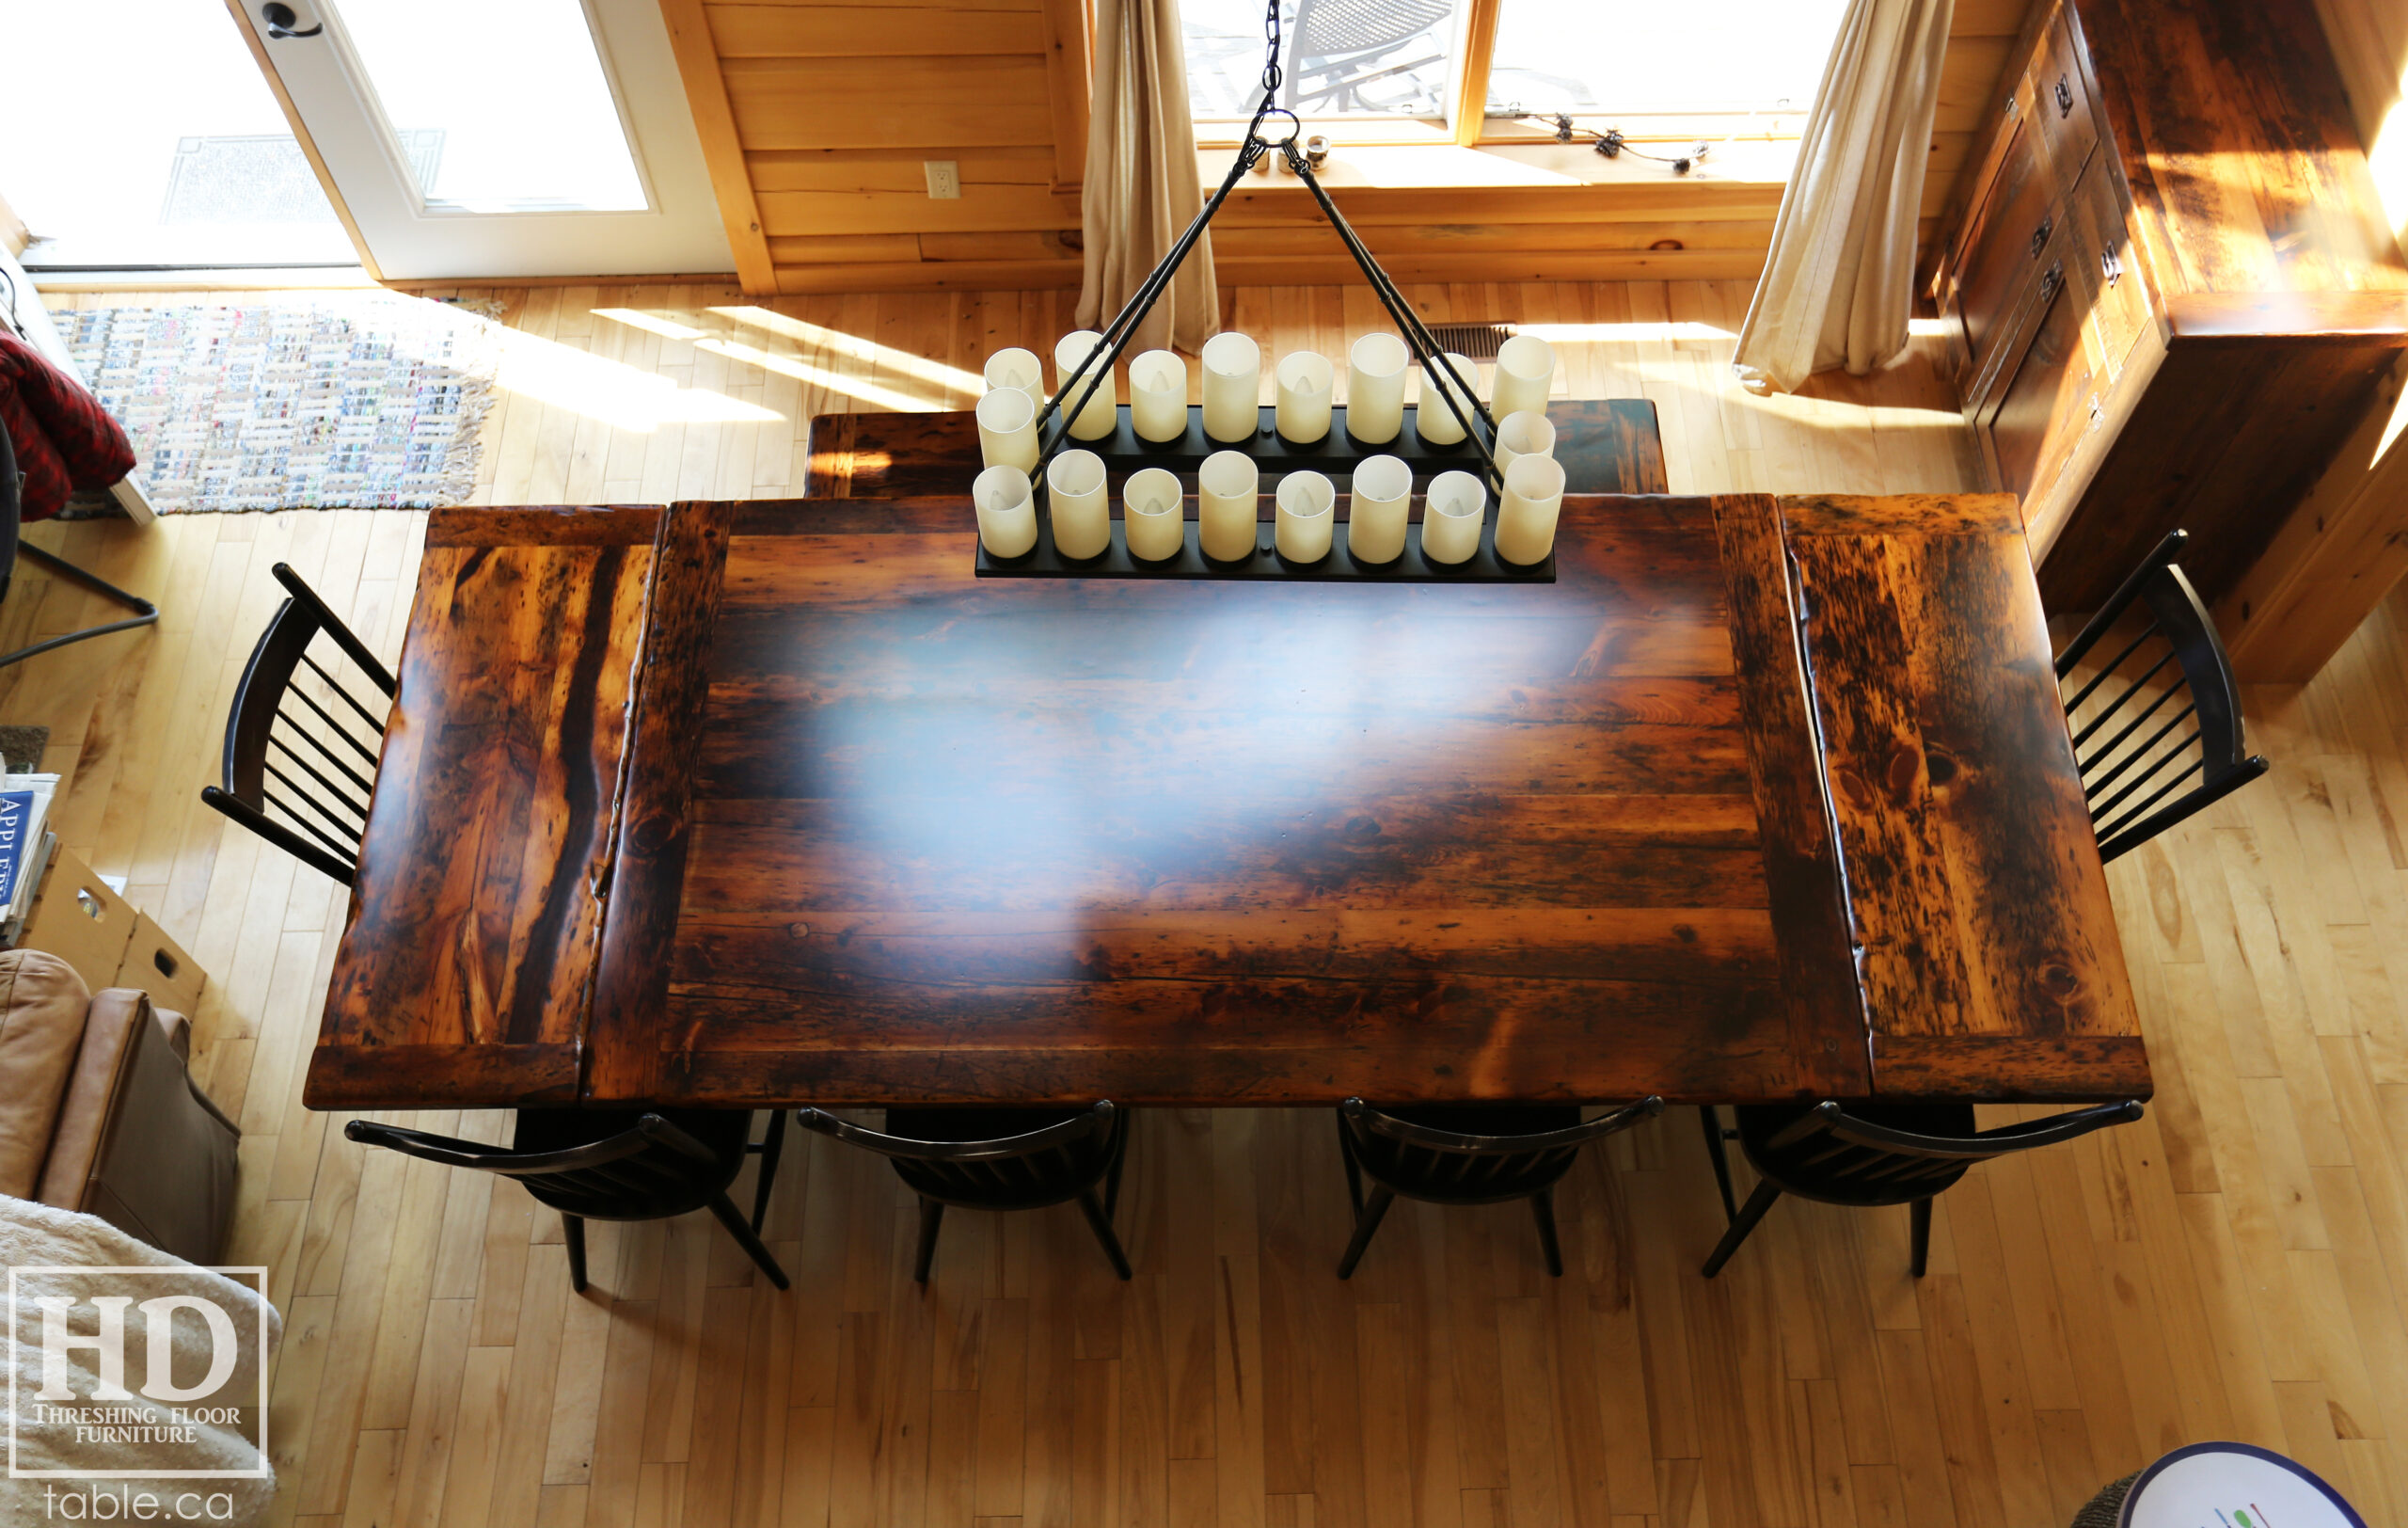 Reclaimed Wood Cottage Table by HD Threshing Floor Furniture / www.table.ca